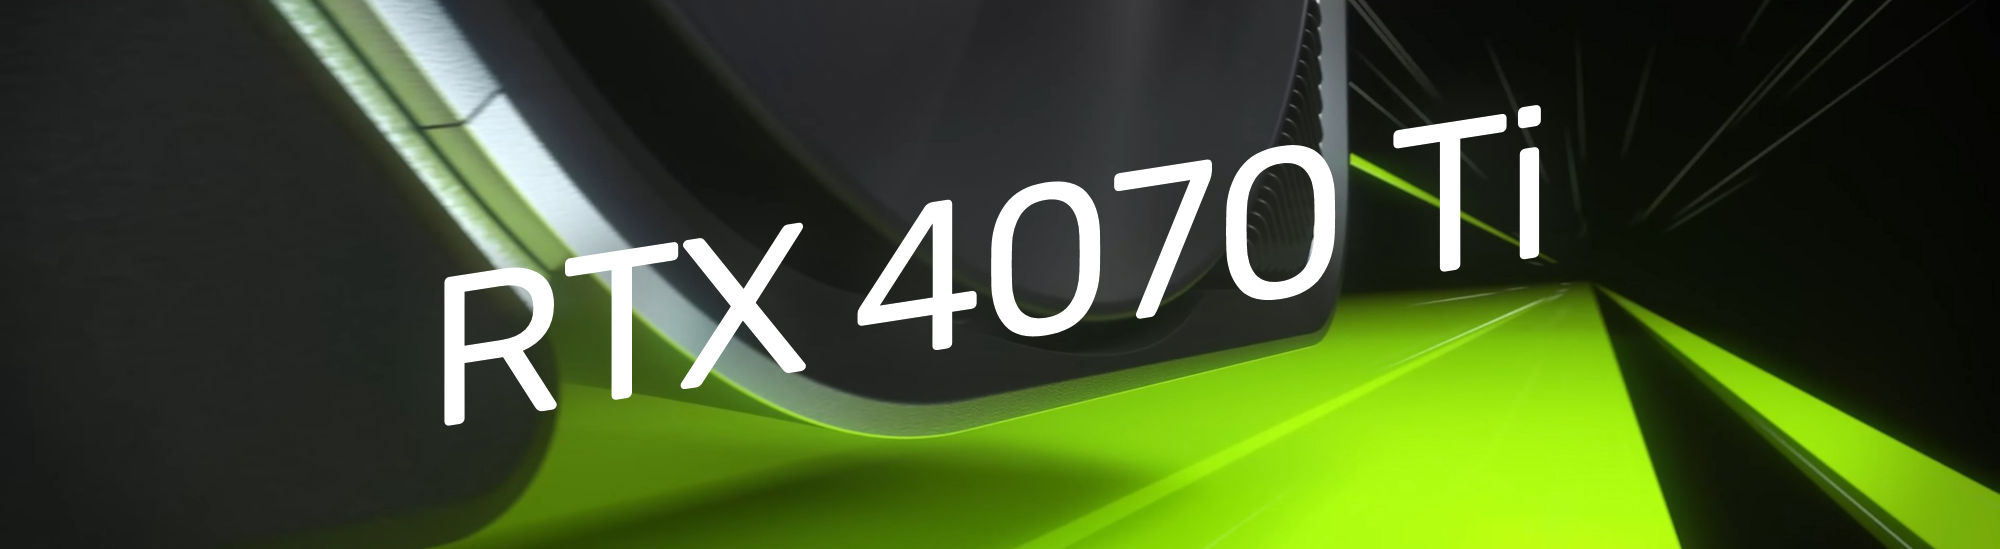 Nvidia GeForce RTX 4080 review: this is the one Nvidia should have  cancelled